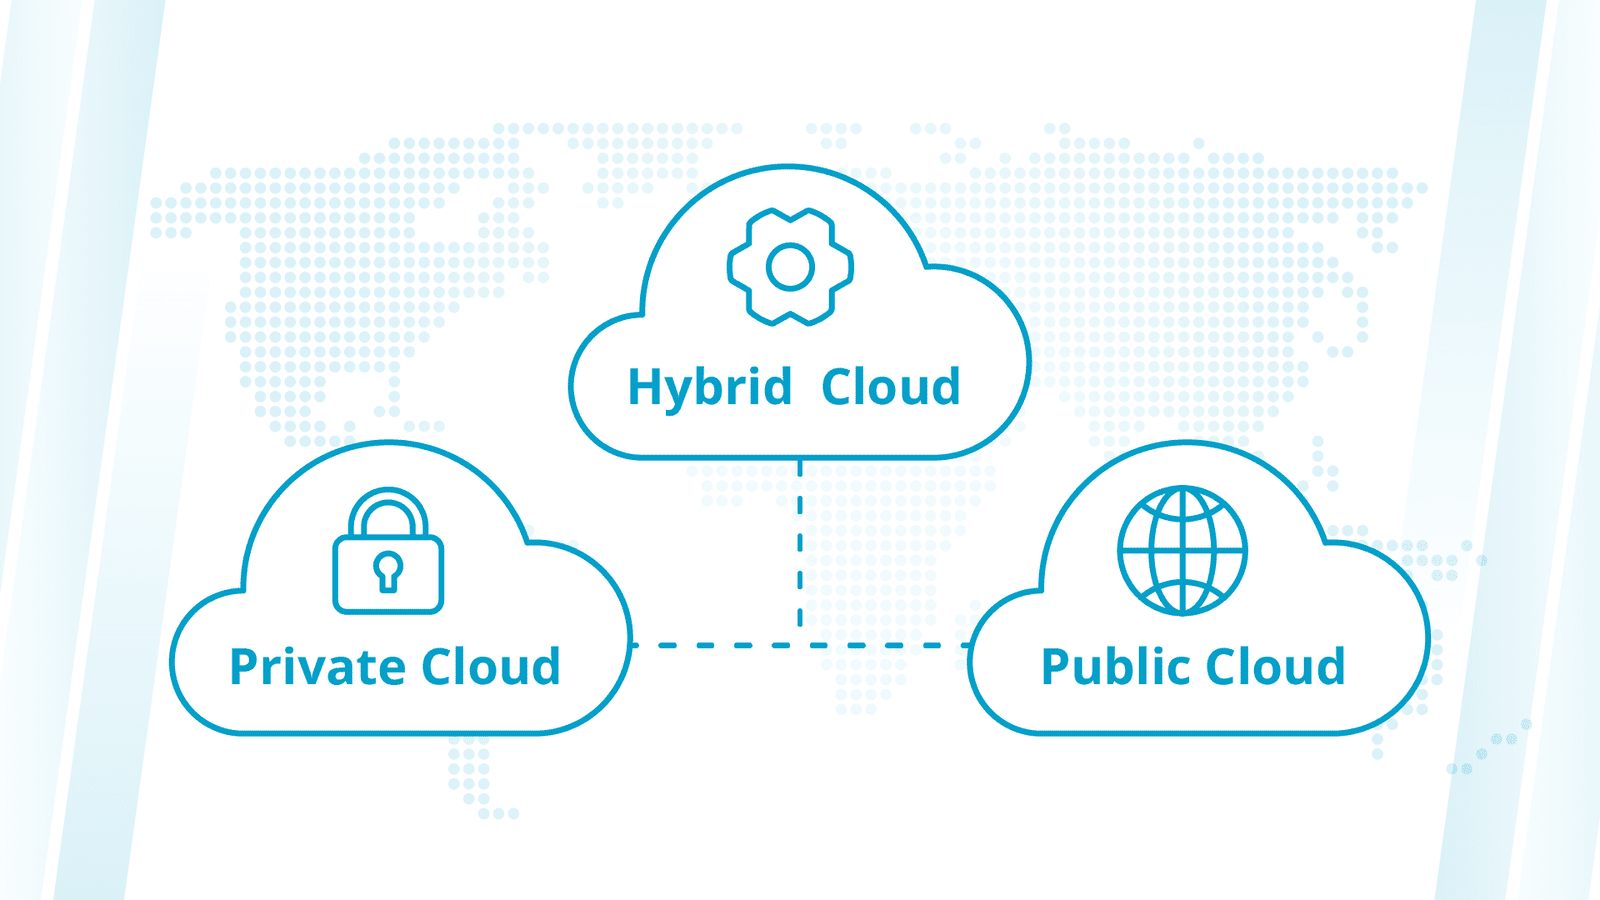 The hybrid cloud strikes the right balance between private and public clouds.